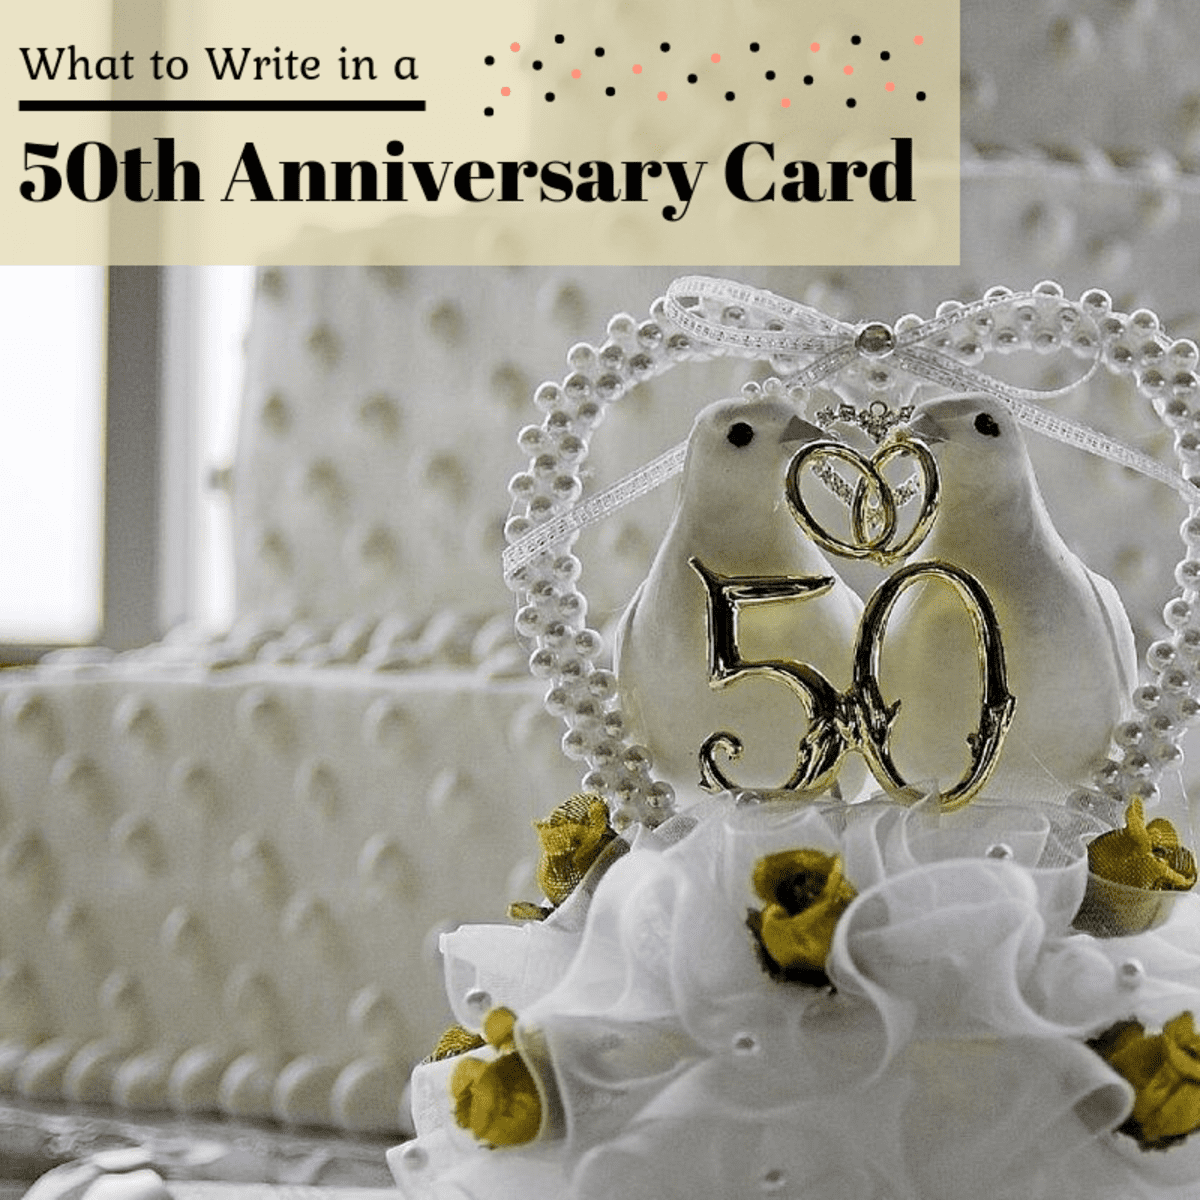 29th Anniversary Wishes: What to Write in a Card - Holidappy